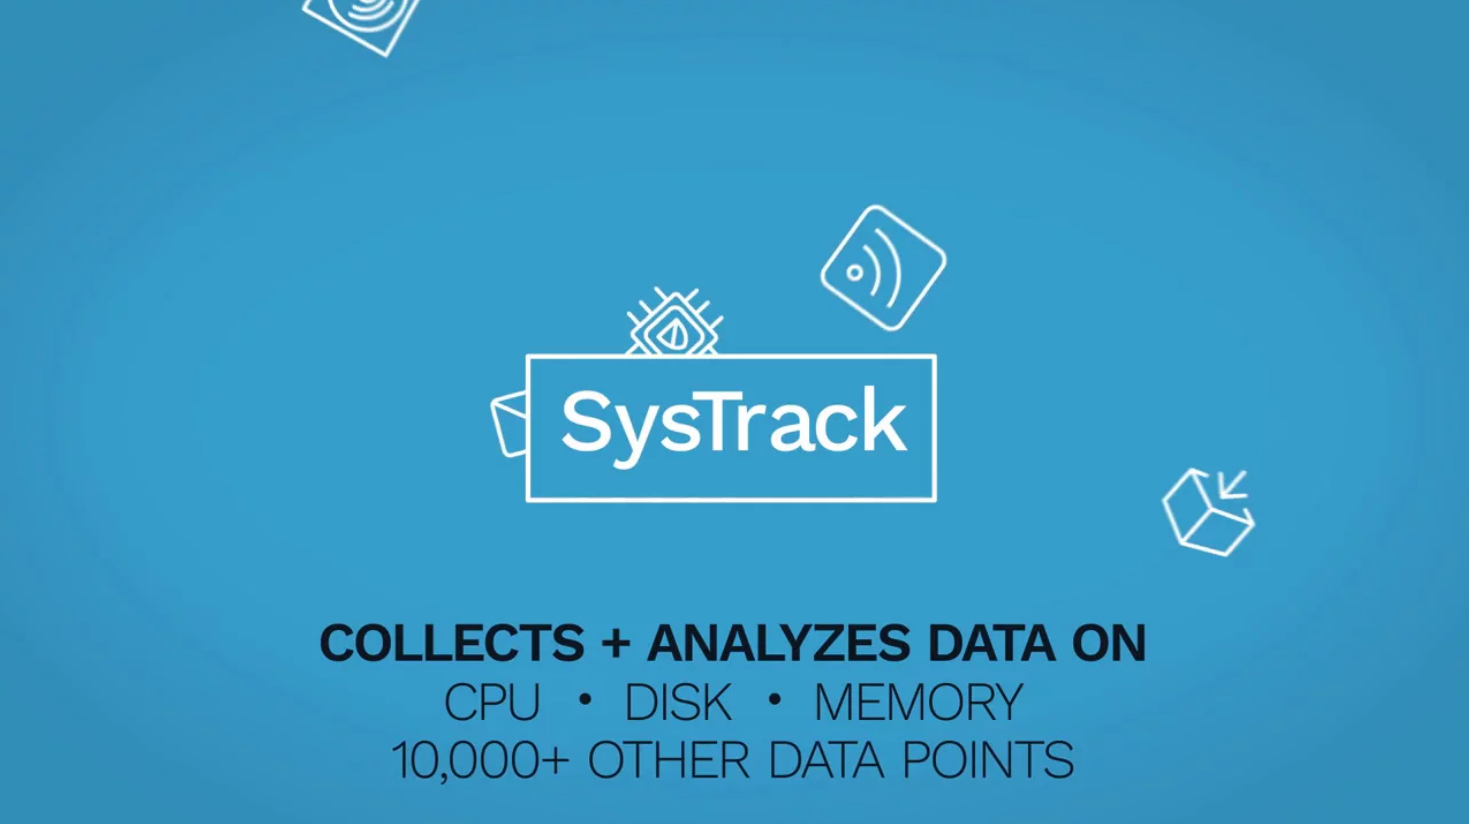 What is SysTrack